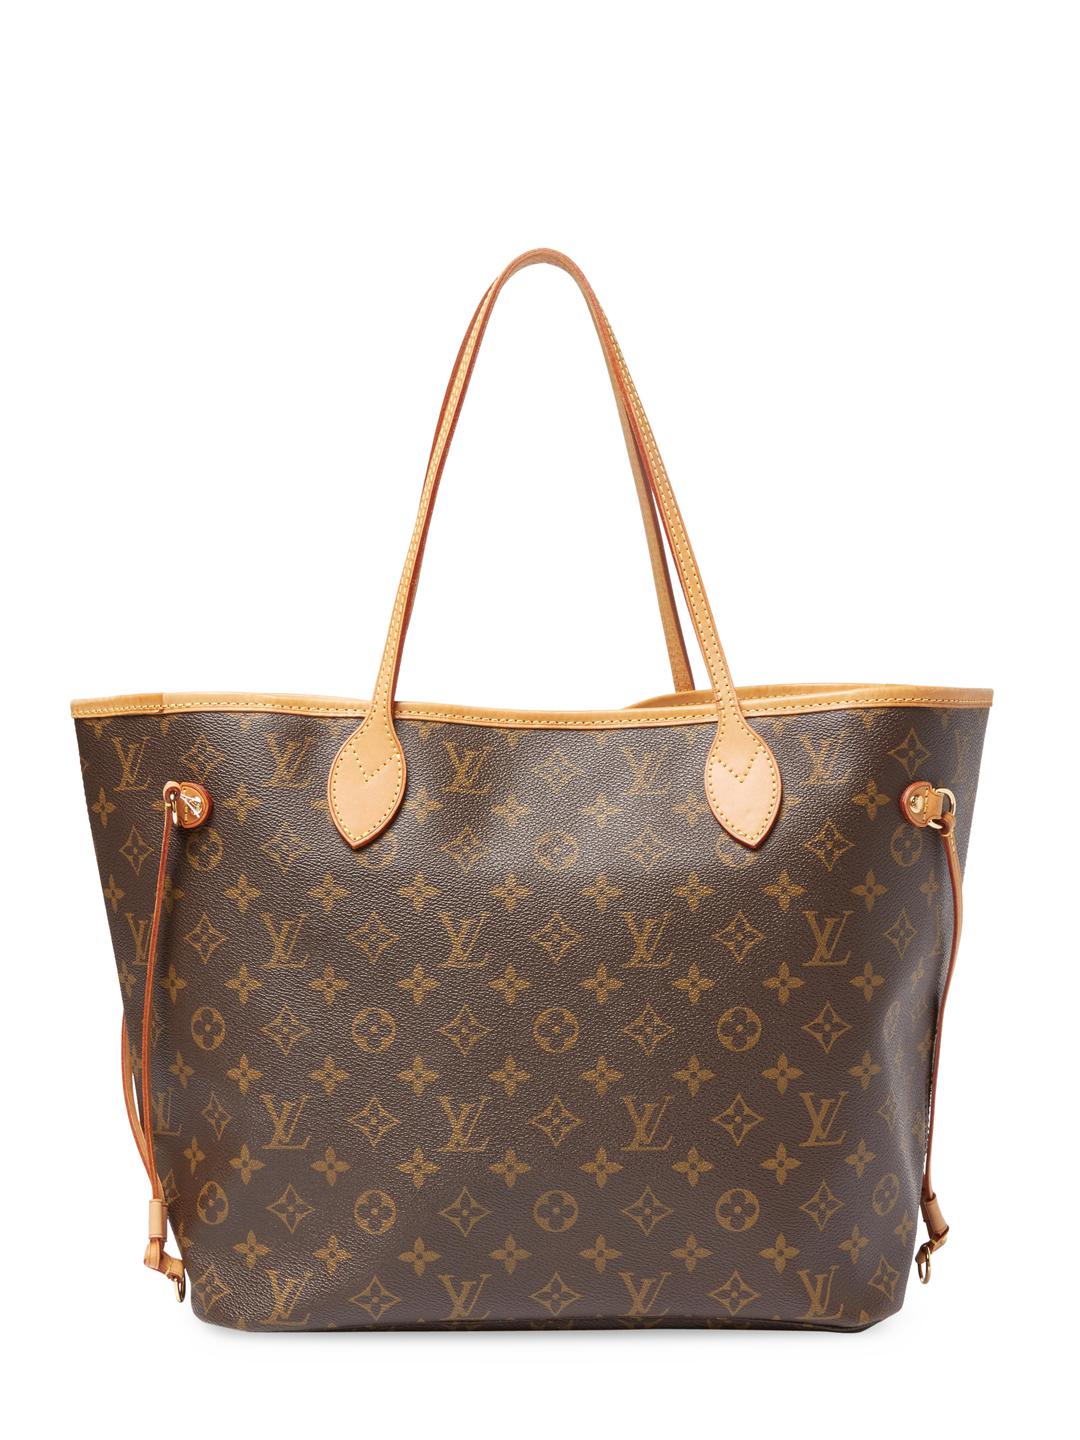 Louis Vuitton Neverfull Tote Bag in Brown - Lyst